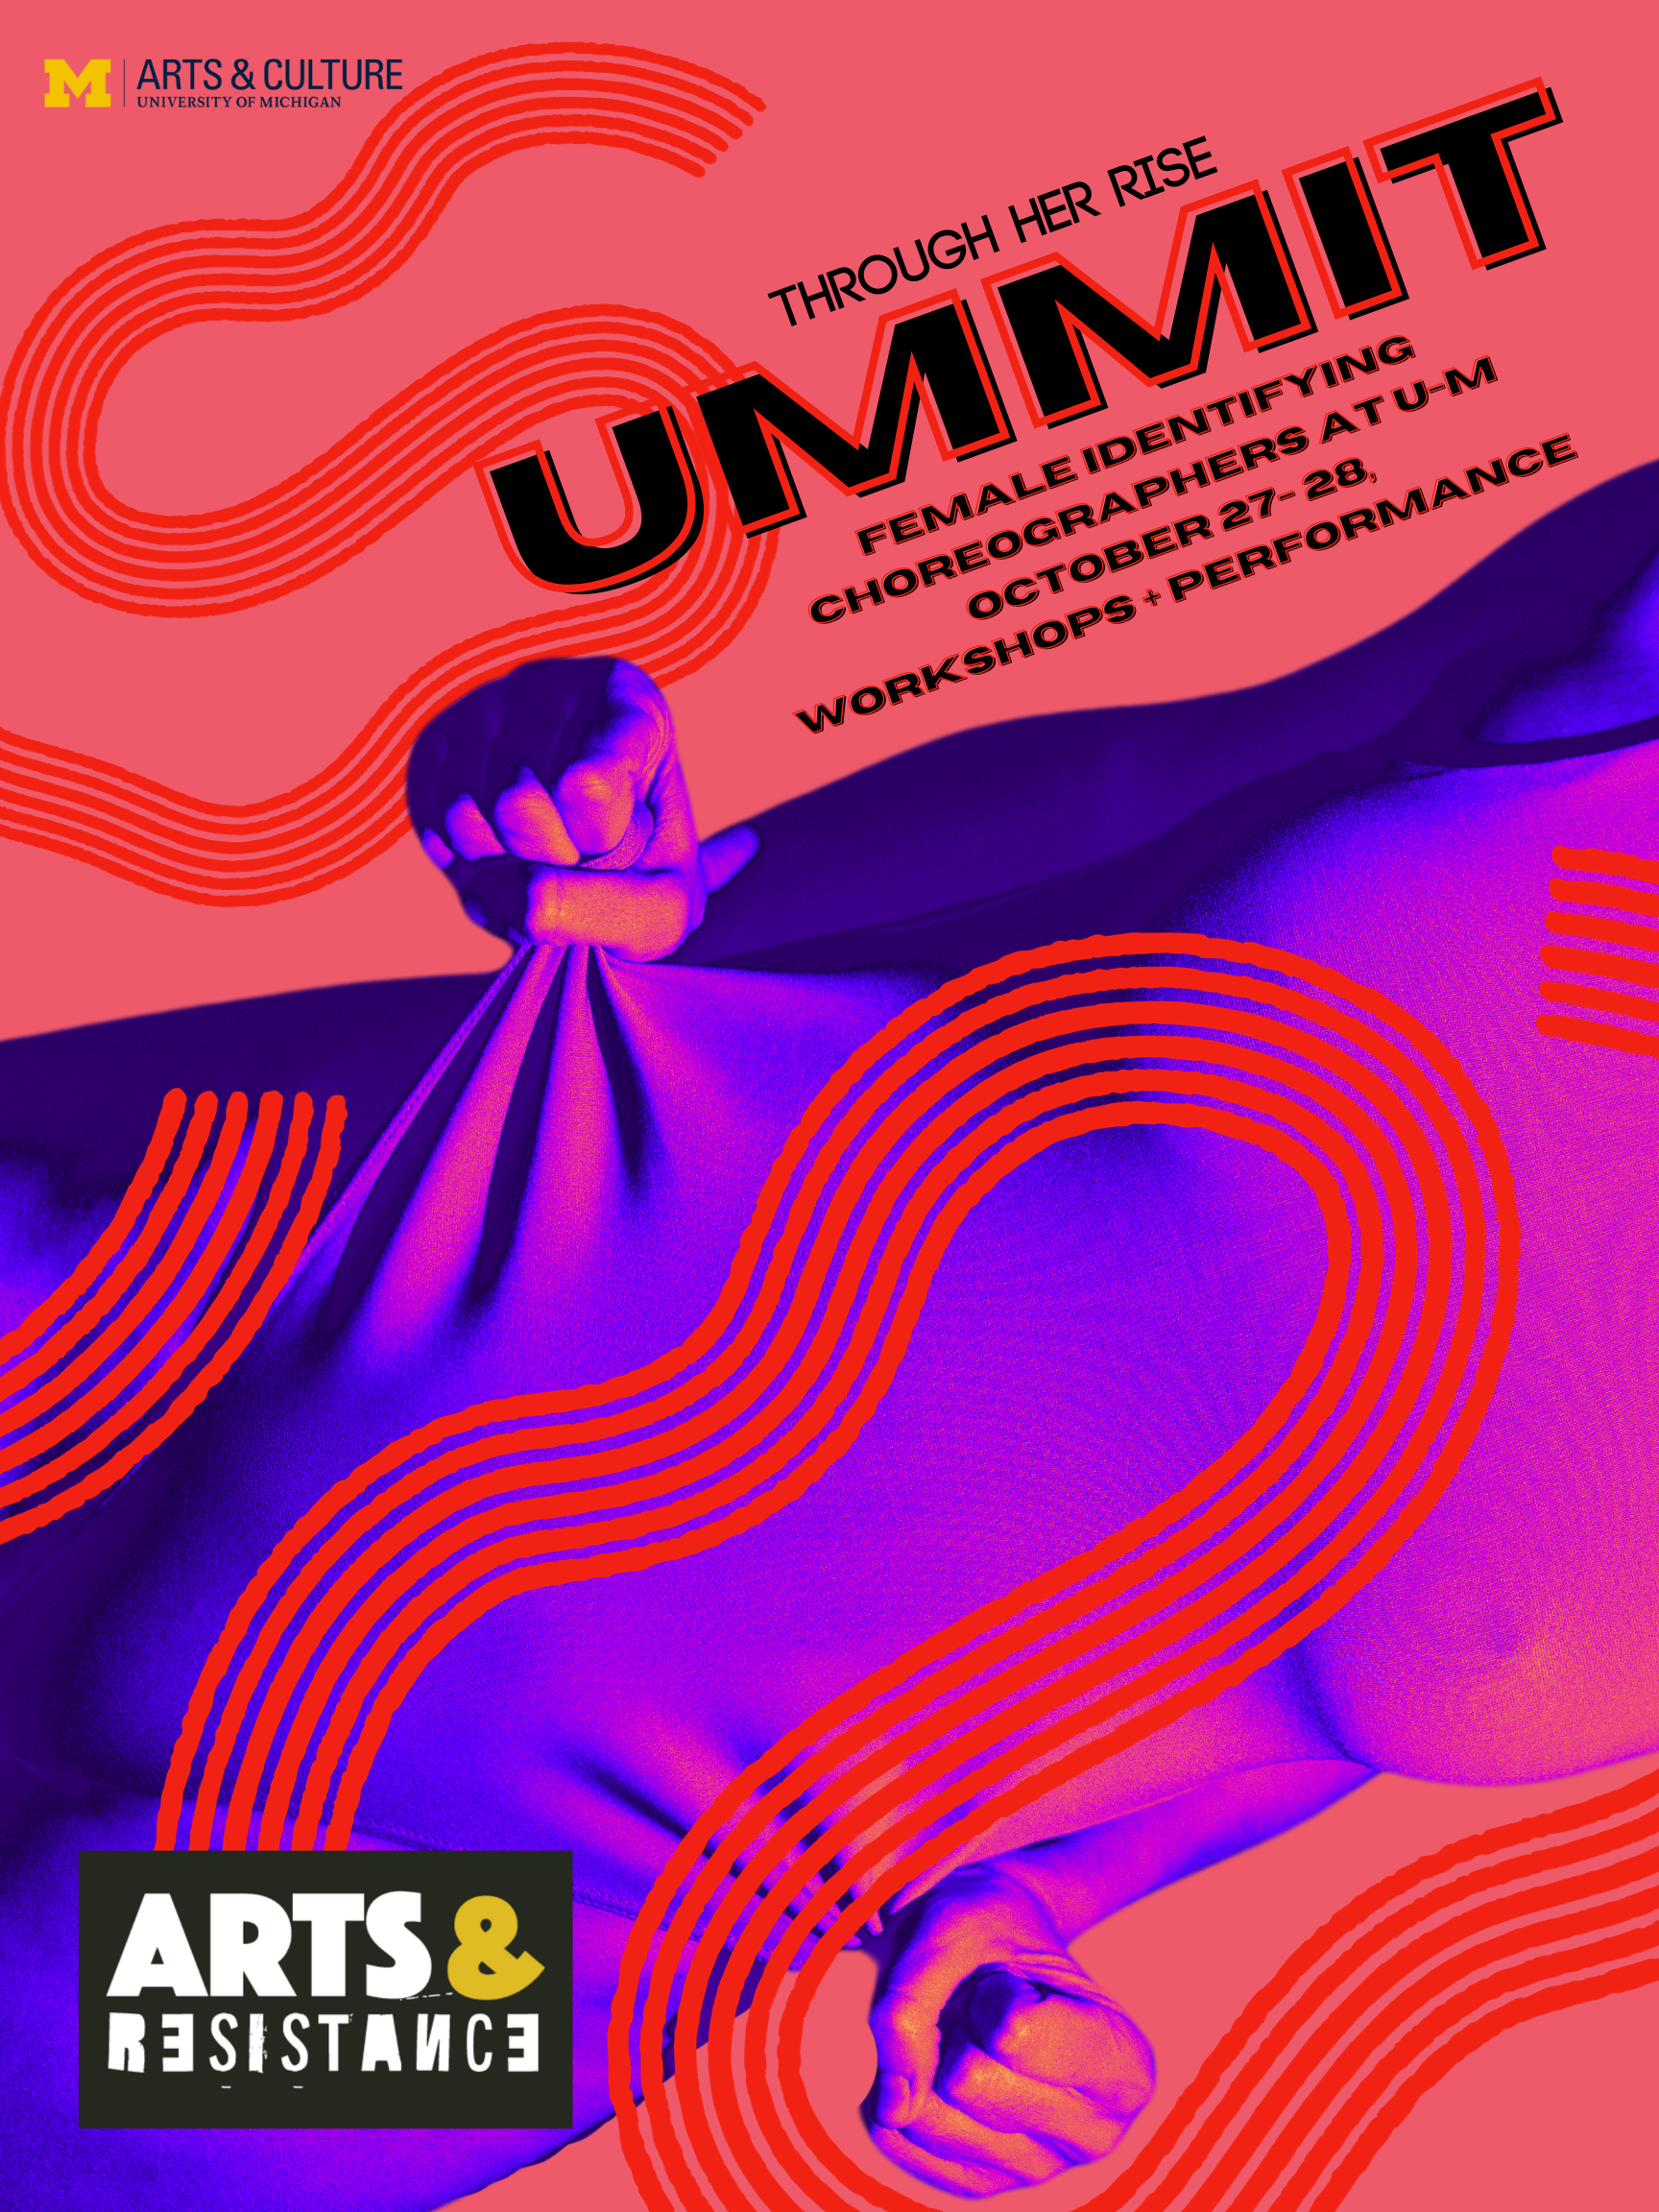 Abstract pink purple and orange image with text that reads "Through Her Rise: Summit. Female-identifying choreographers at U-M. October 27-28. Workshops. Performance." And a Arts & Resistance logo.